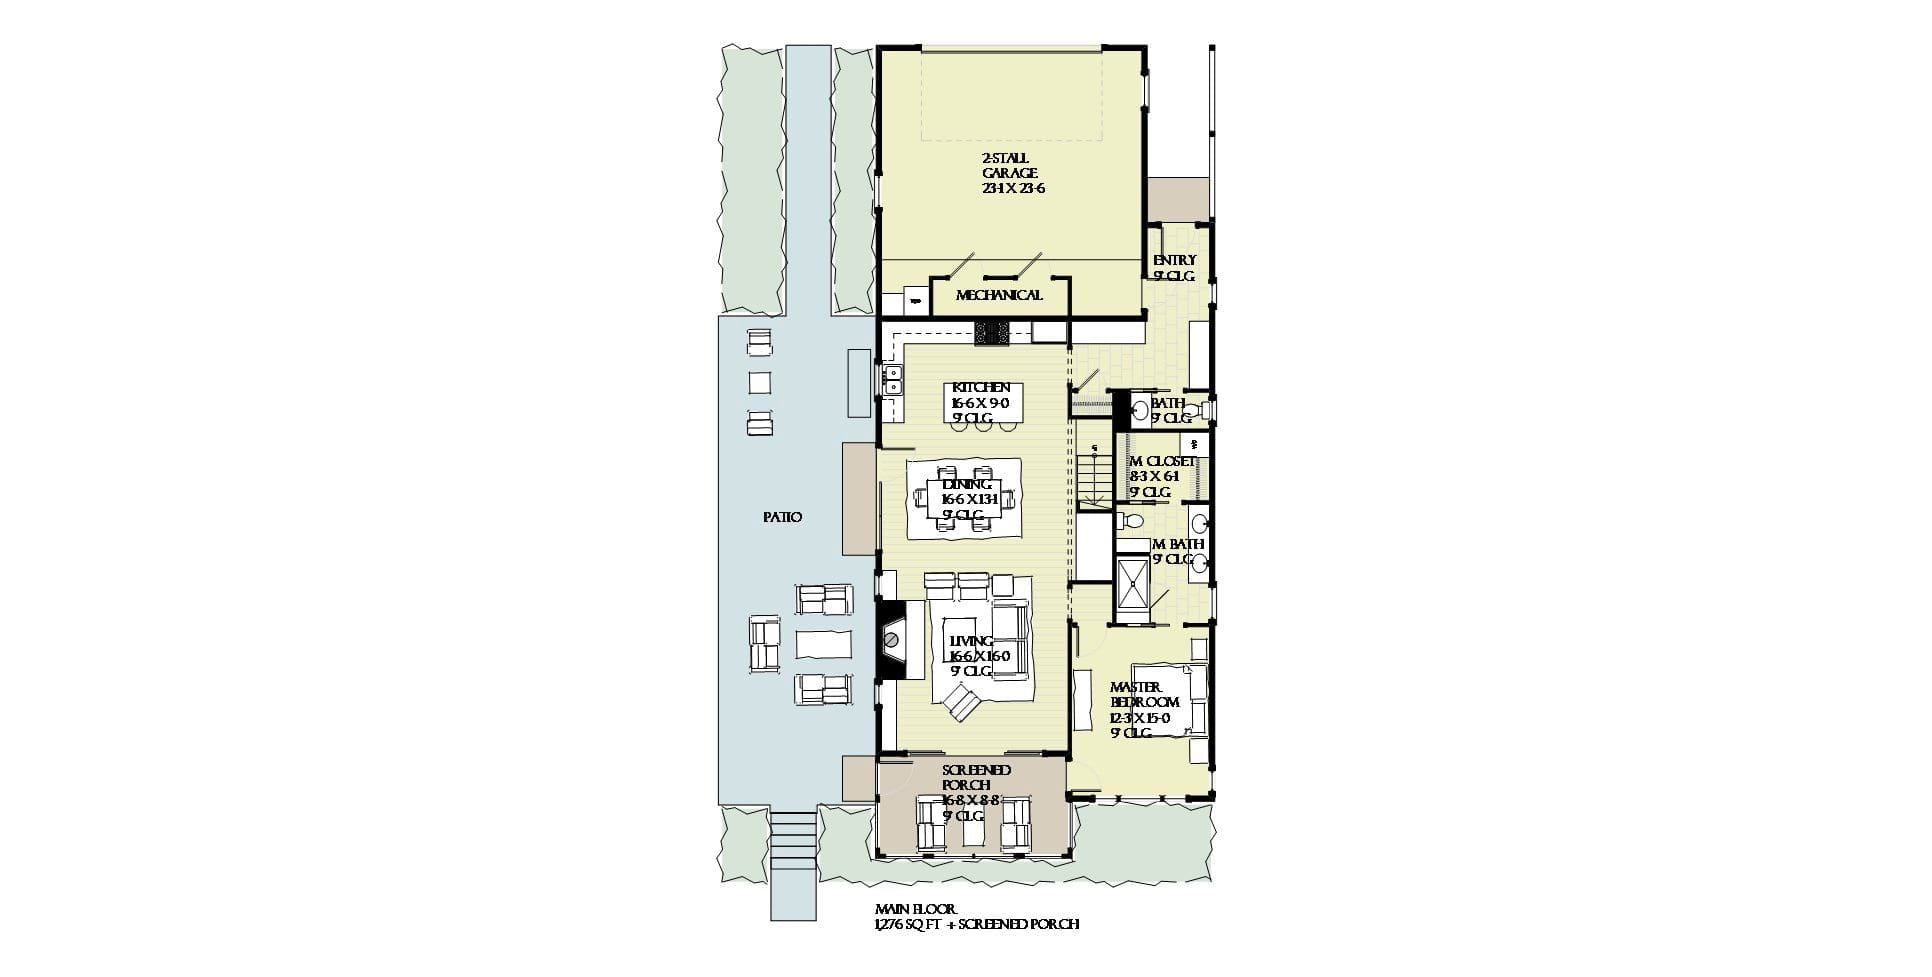 Cobia - Home Design and Floor Plan - SketchPad House Plans